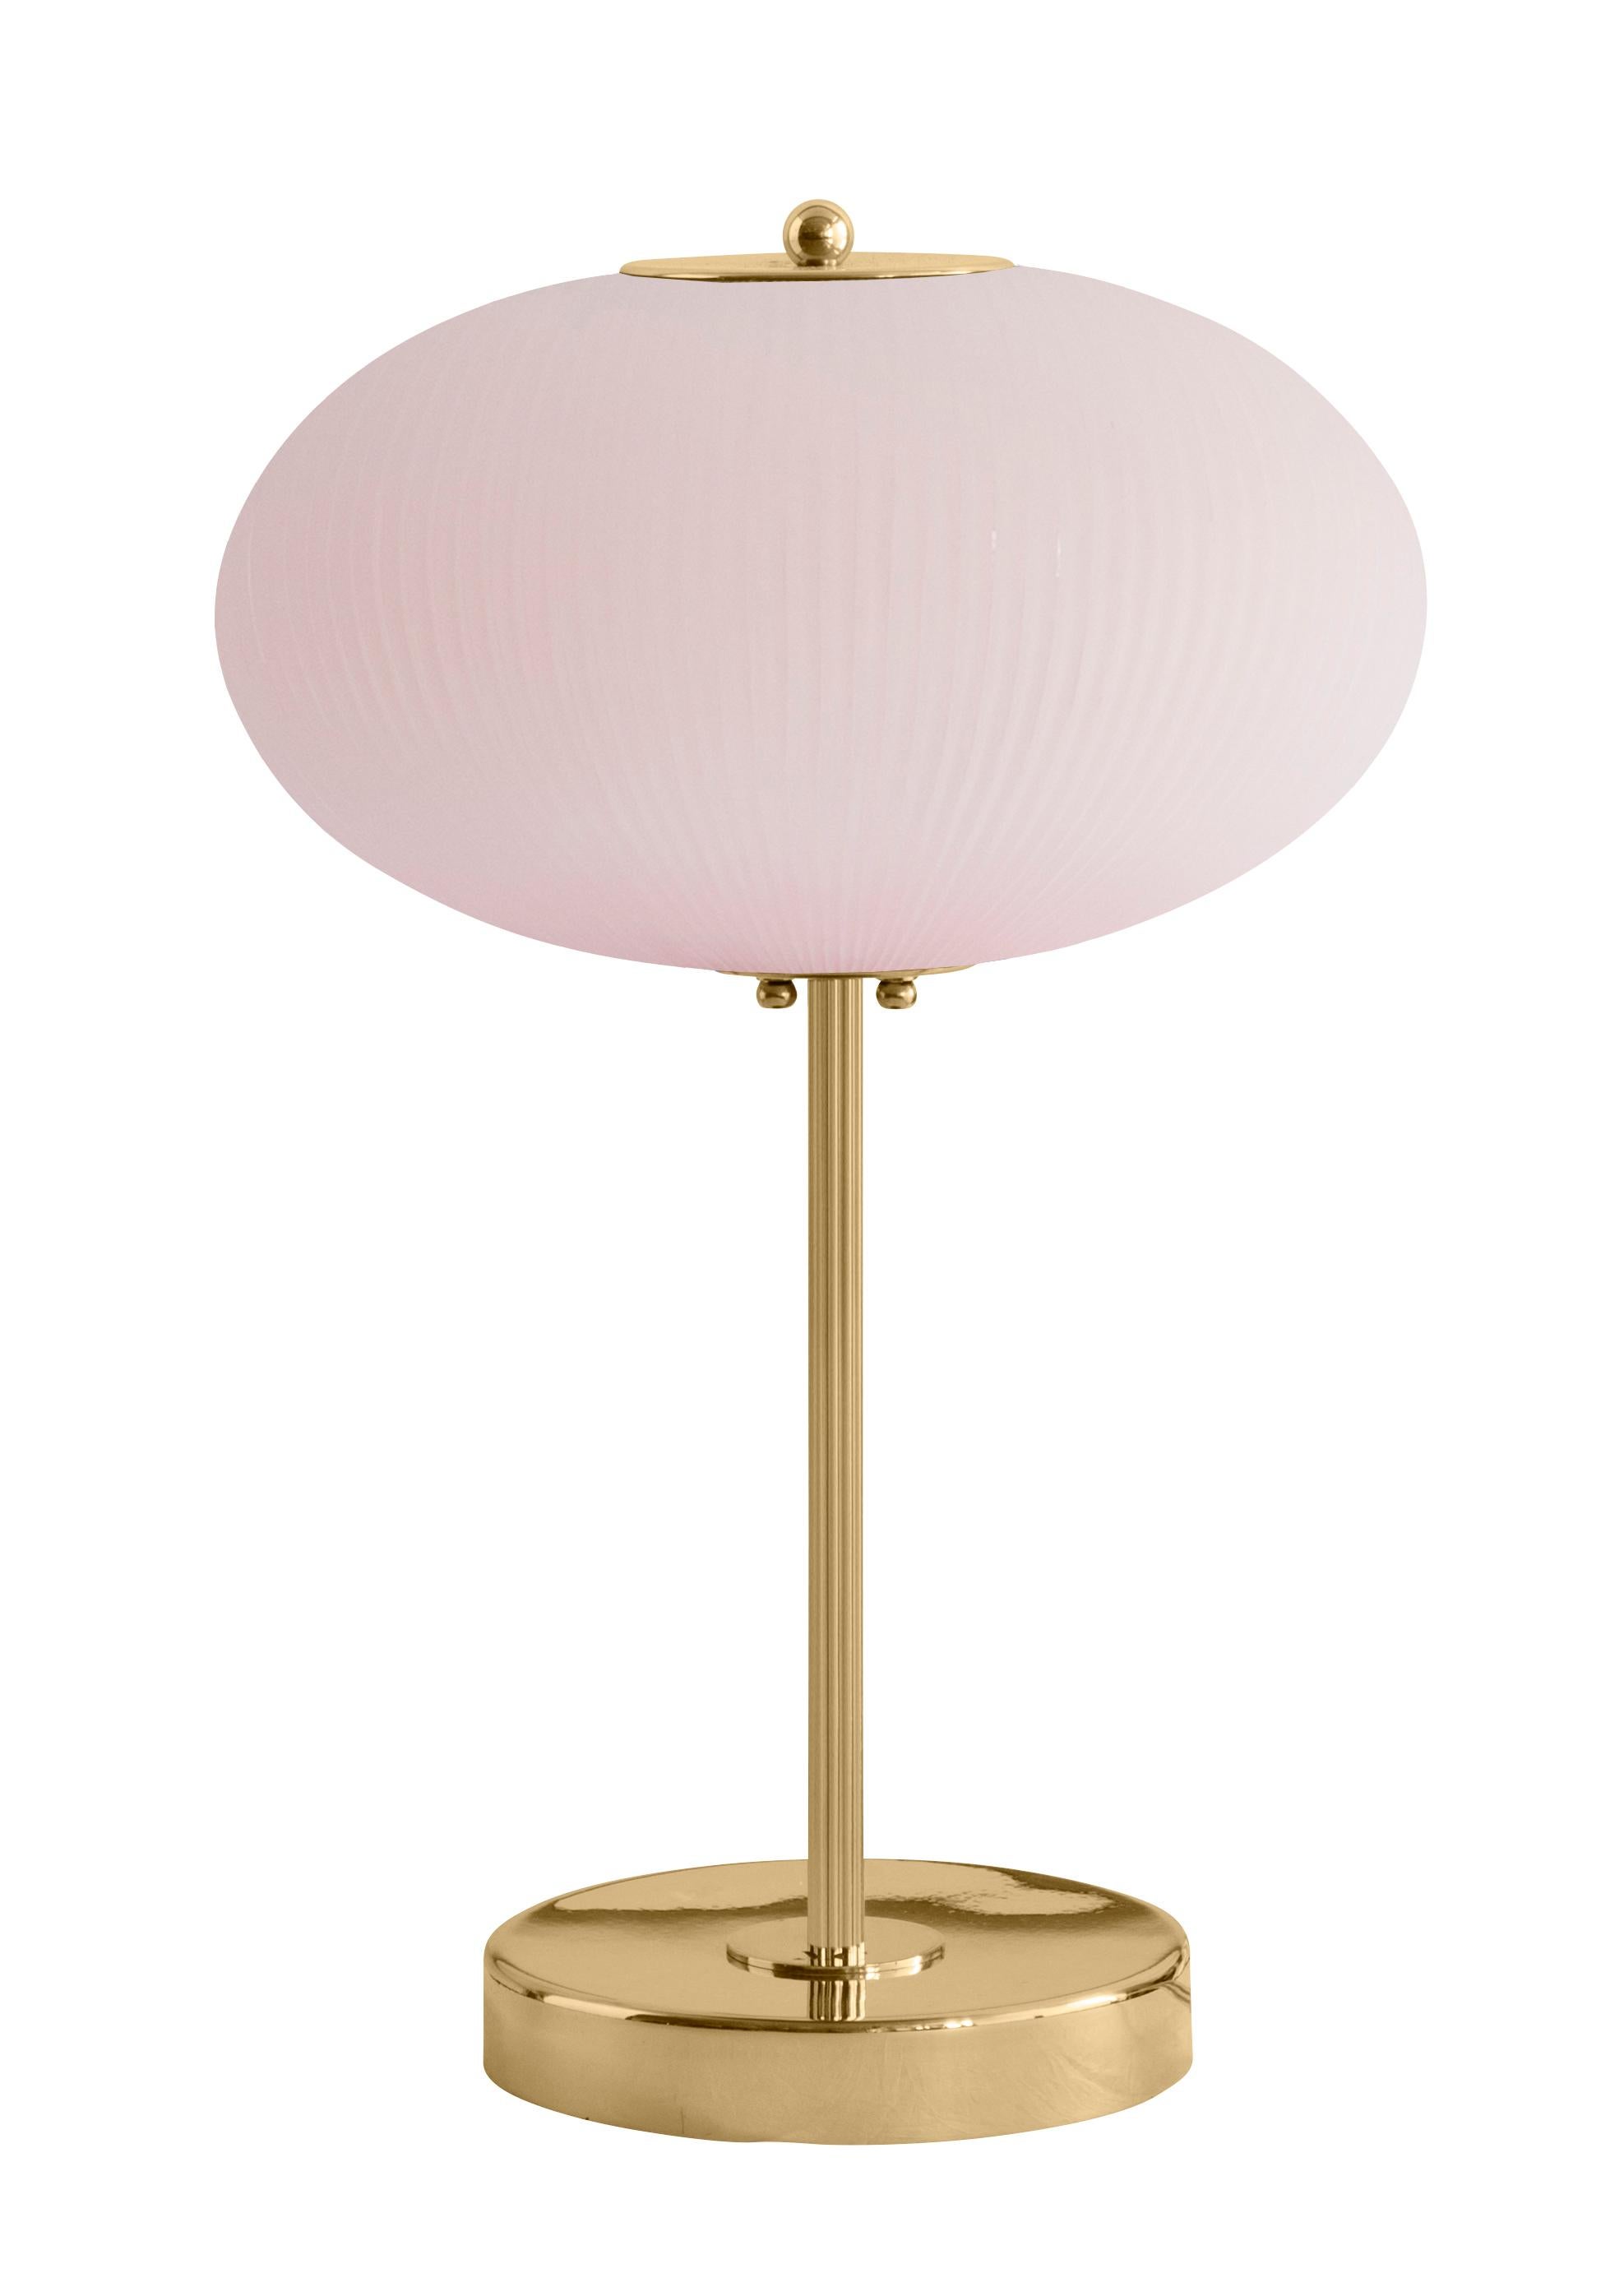 Set of 2 table lamp China 07 by Magic Circus Editions
Dimensions: H 50 x W 32 x D 32 cm
Materials: brass, mouth blown glass sculpted with a diamond saw
Colour: soft rose

Available finishes: brass, nickel
Available colours: enamel soft white,